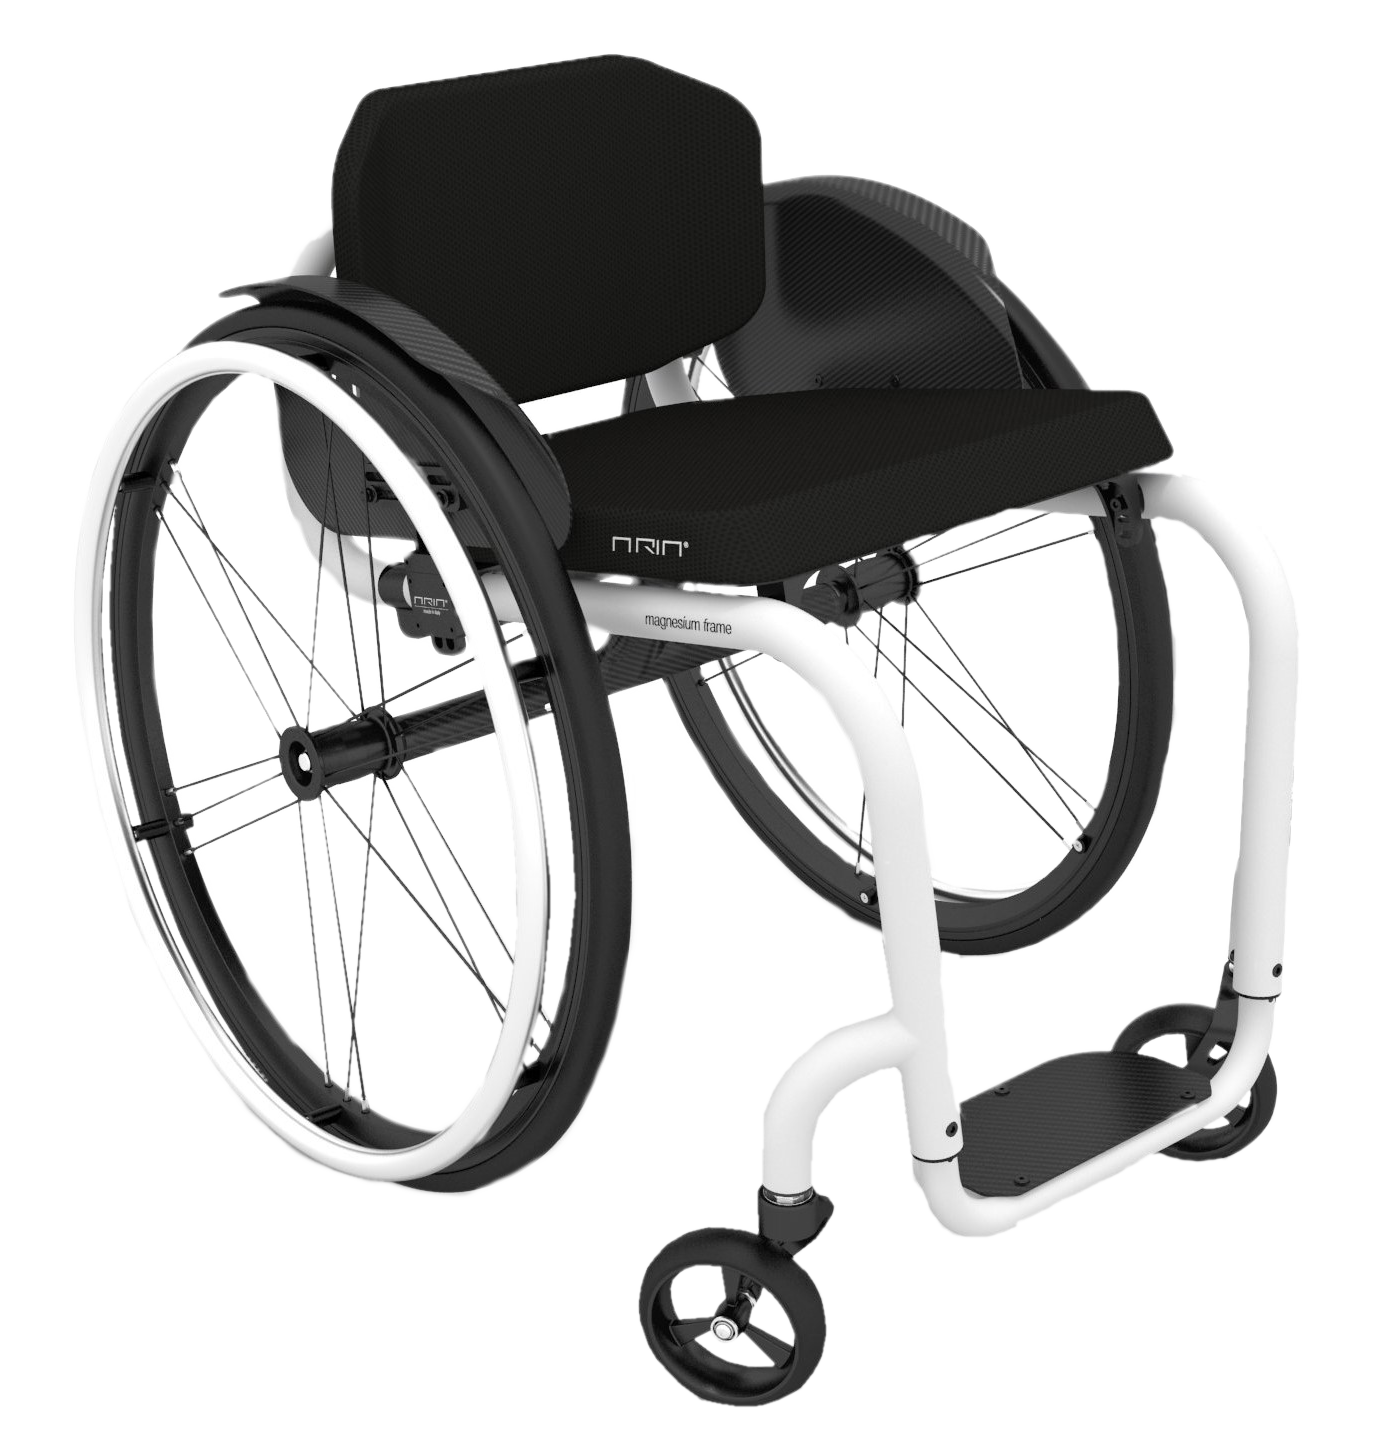 The Aria 1.0 is a 100% manually assembled product. Its foldable backrest and rigid magnesium alloy frame, make it ideal for active users.